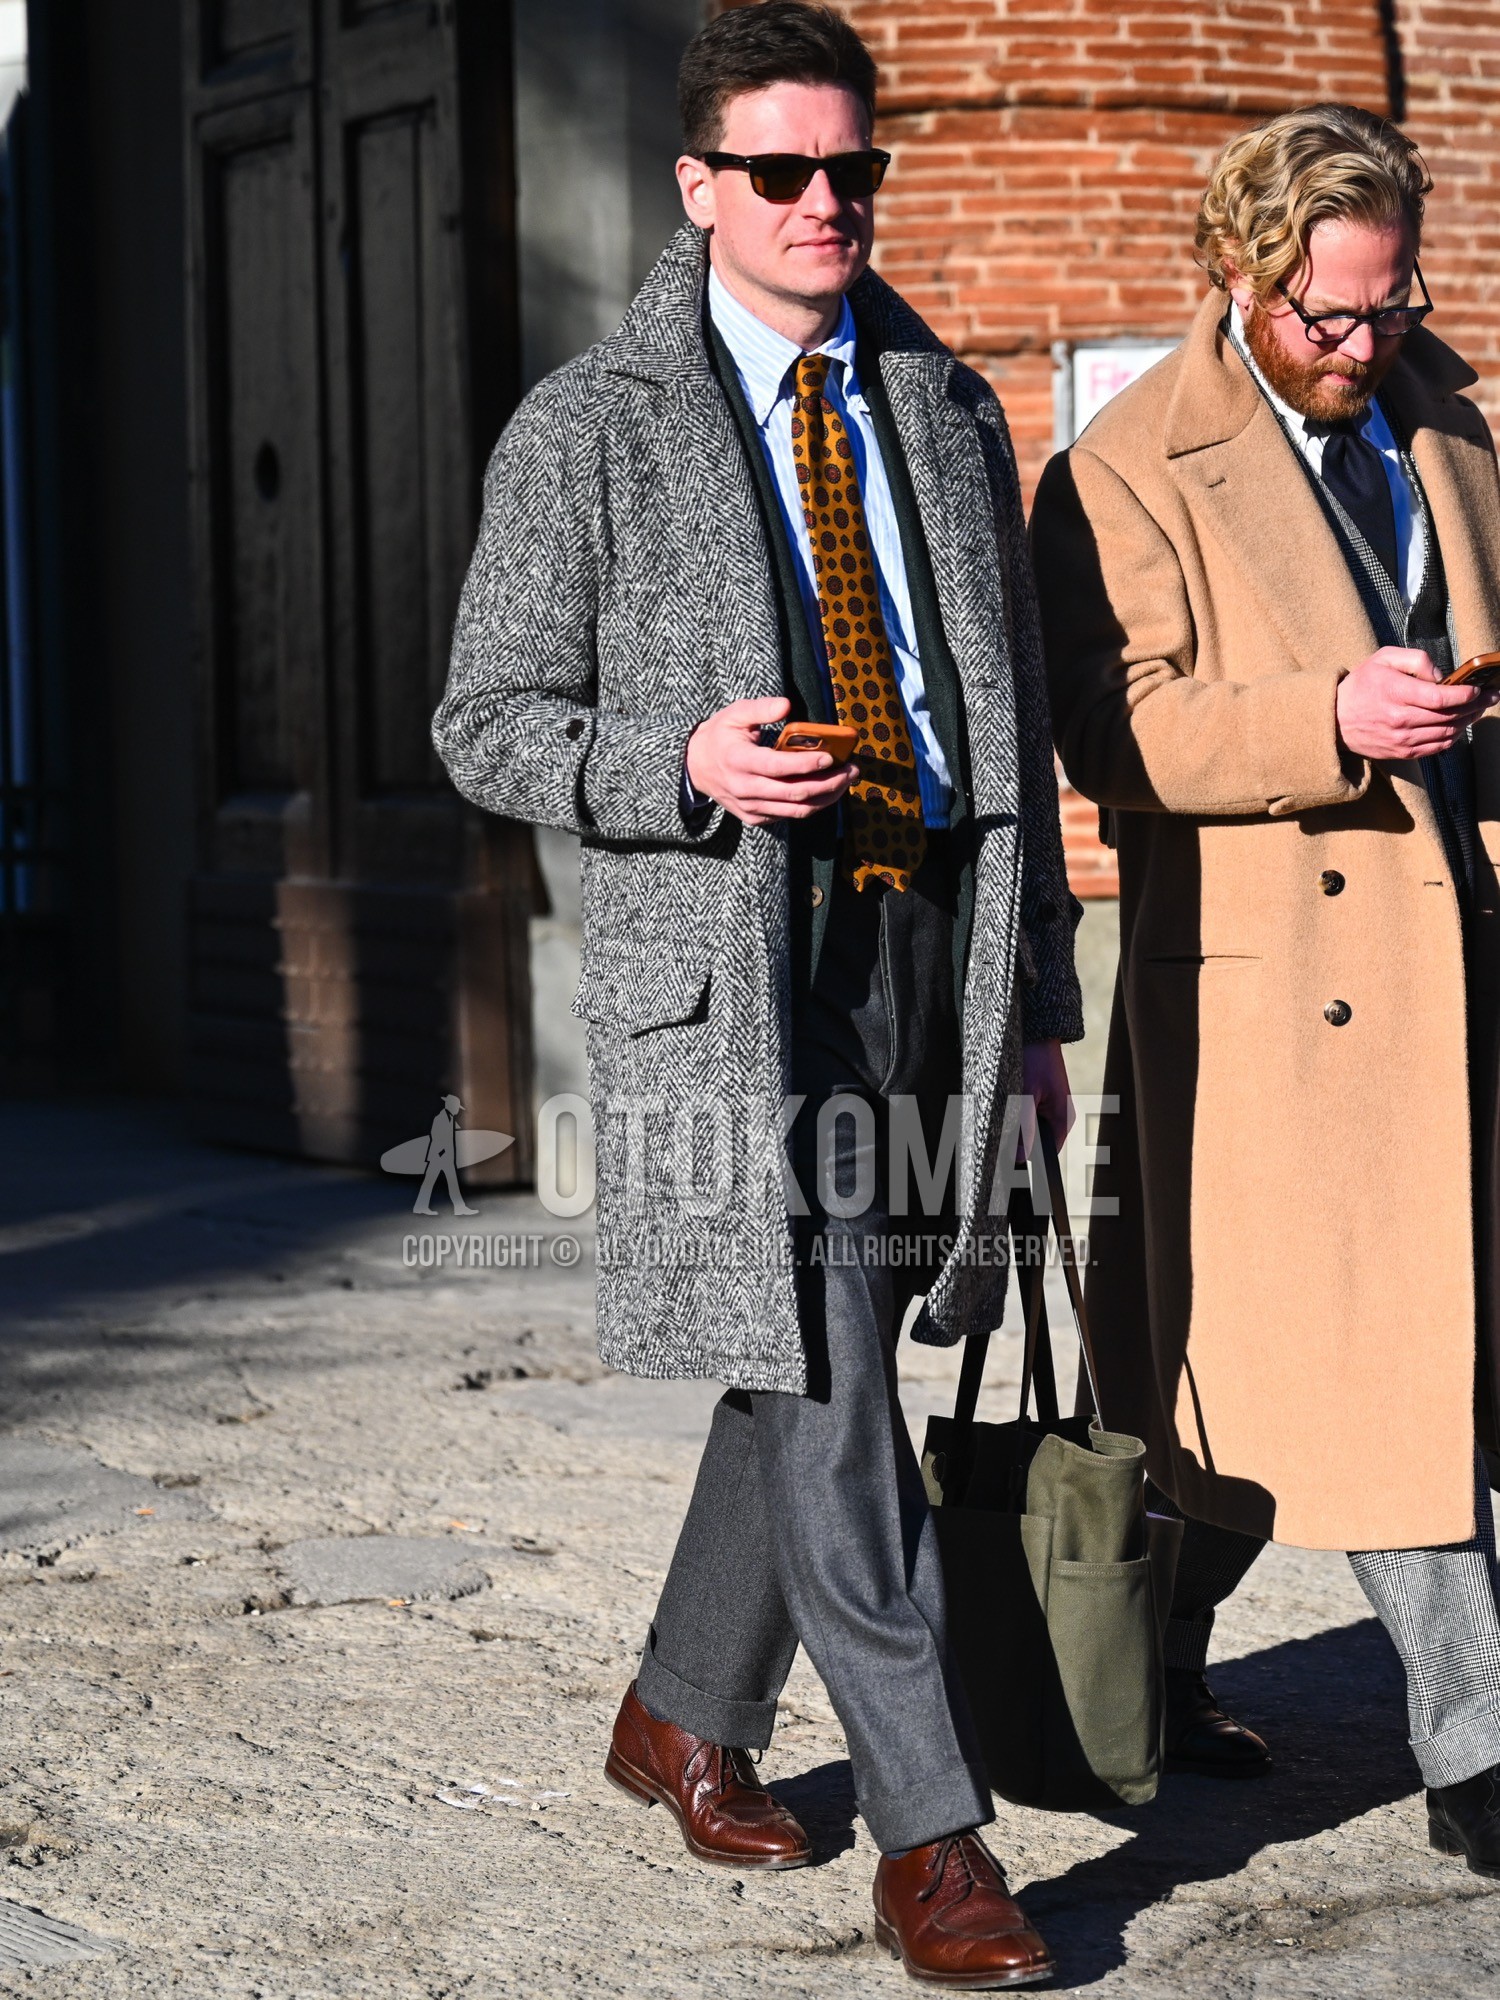 Men's autumn winter outfit with brown tortoiseshell sunglasses, gray herringbone ulster coat, green herringbone tailored jacket, white blue stripes shirt, gray plain slacks, brown u-tip shoes leather shoes, olive green plain tote bag, yellow small crest necktie.